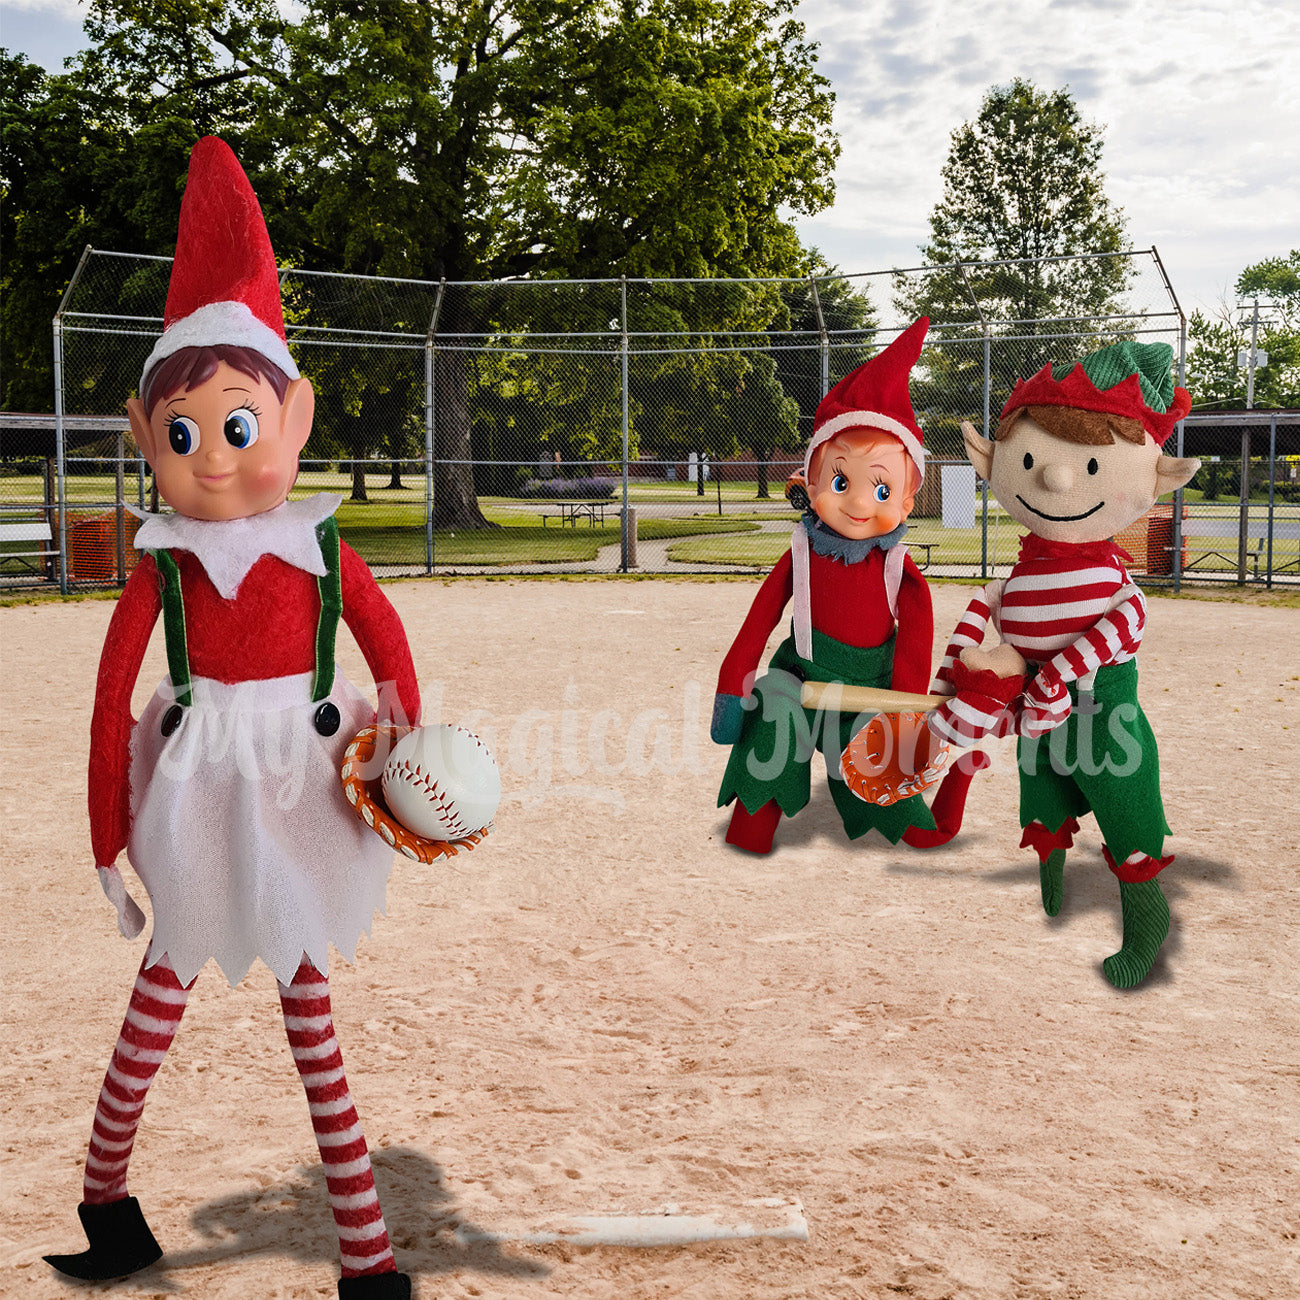 elves playing a game of baseball